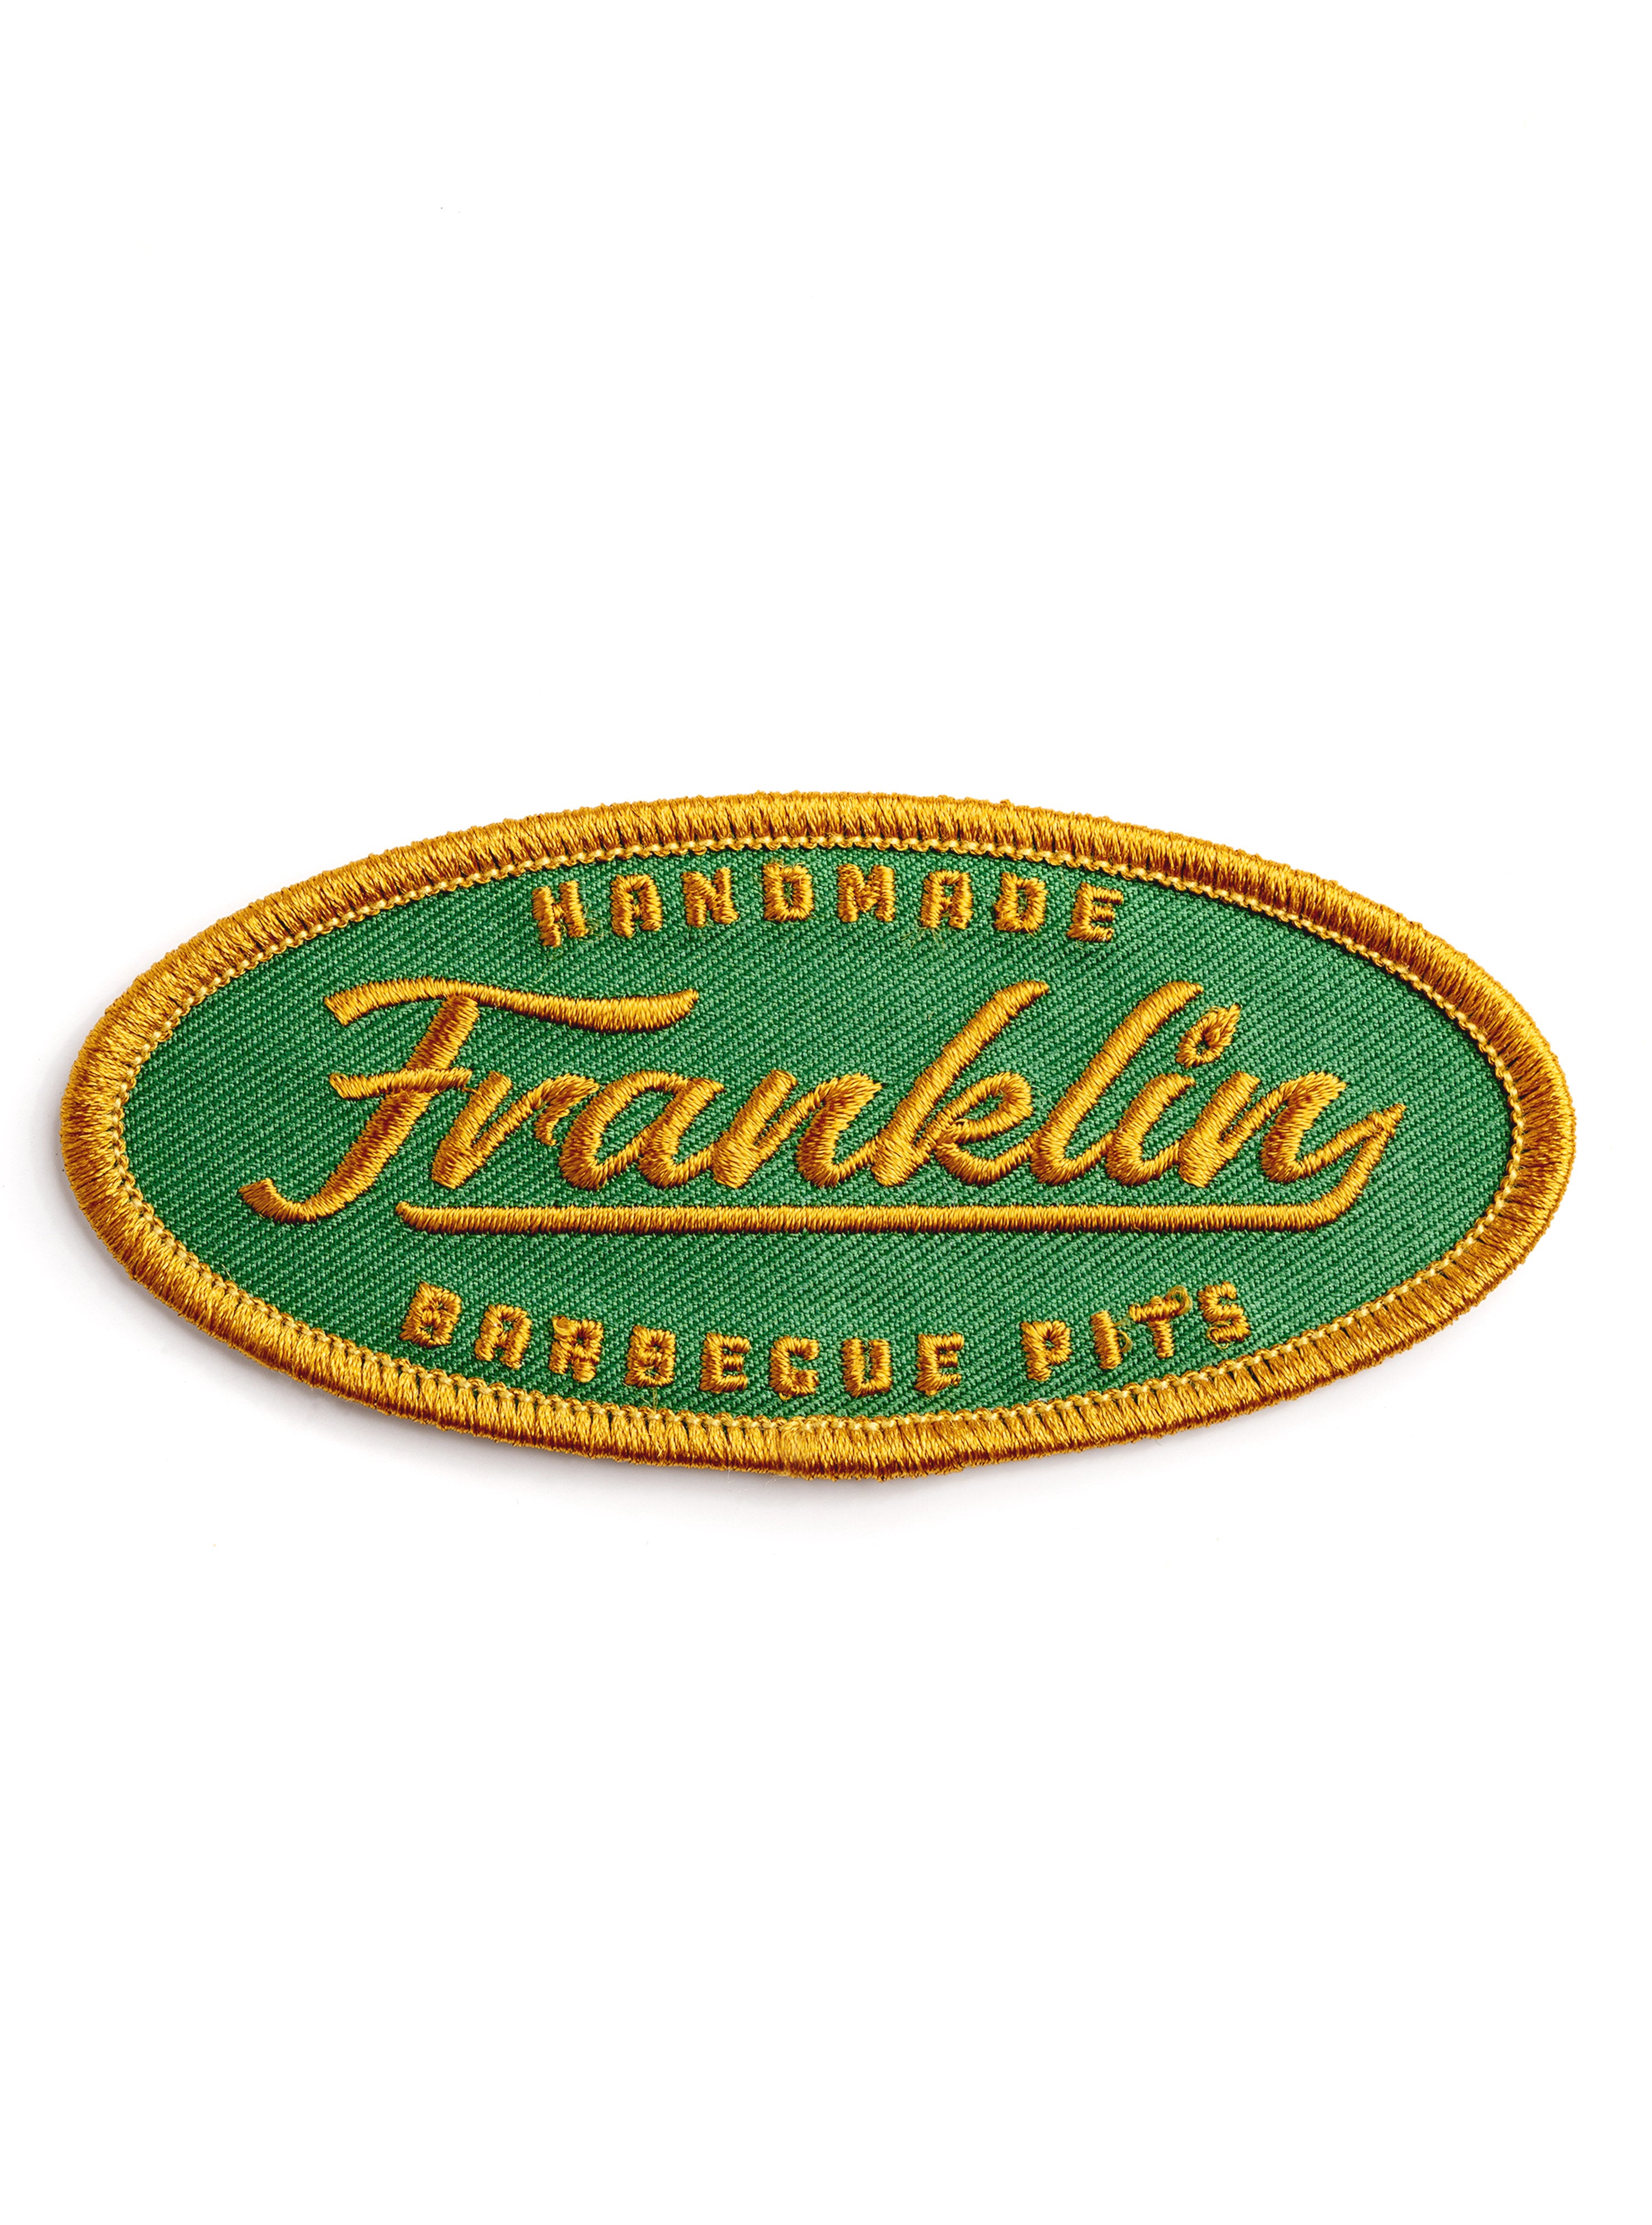 Oval patch with green background and stictched logo saying "Handmade Franklin Barbecue Pits" in gold and bordered in gold